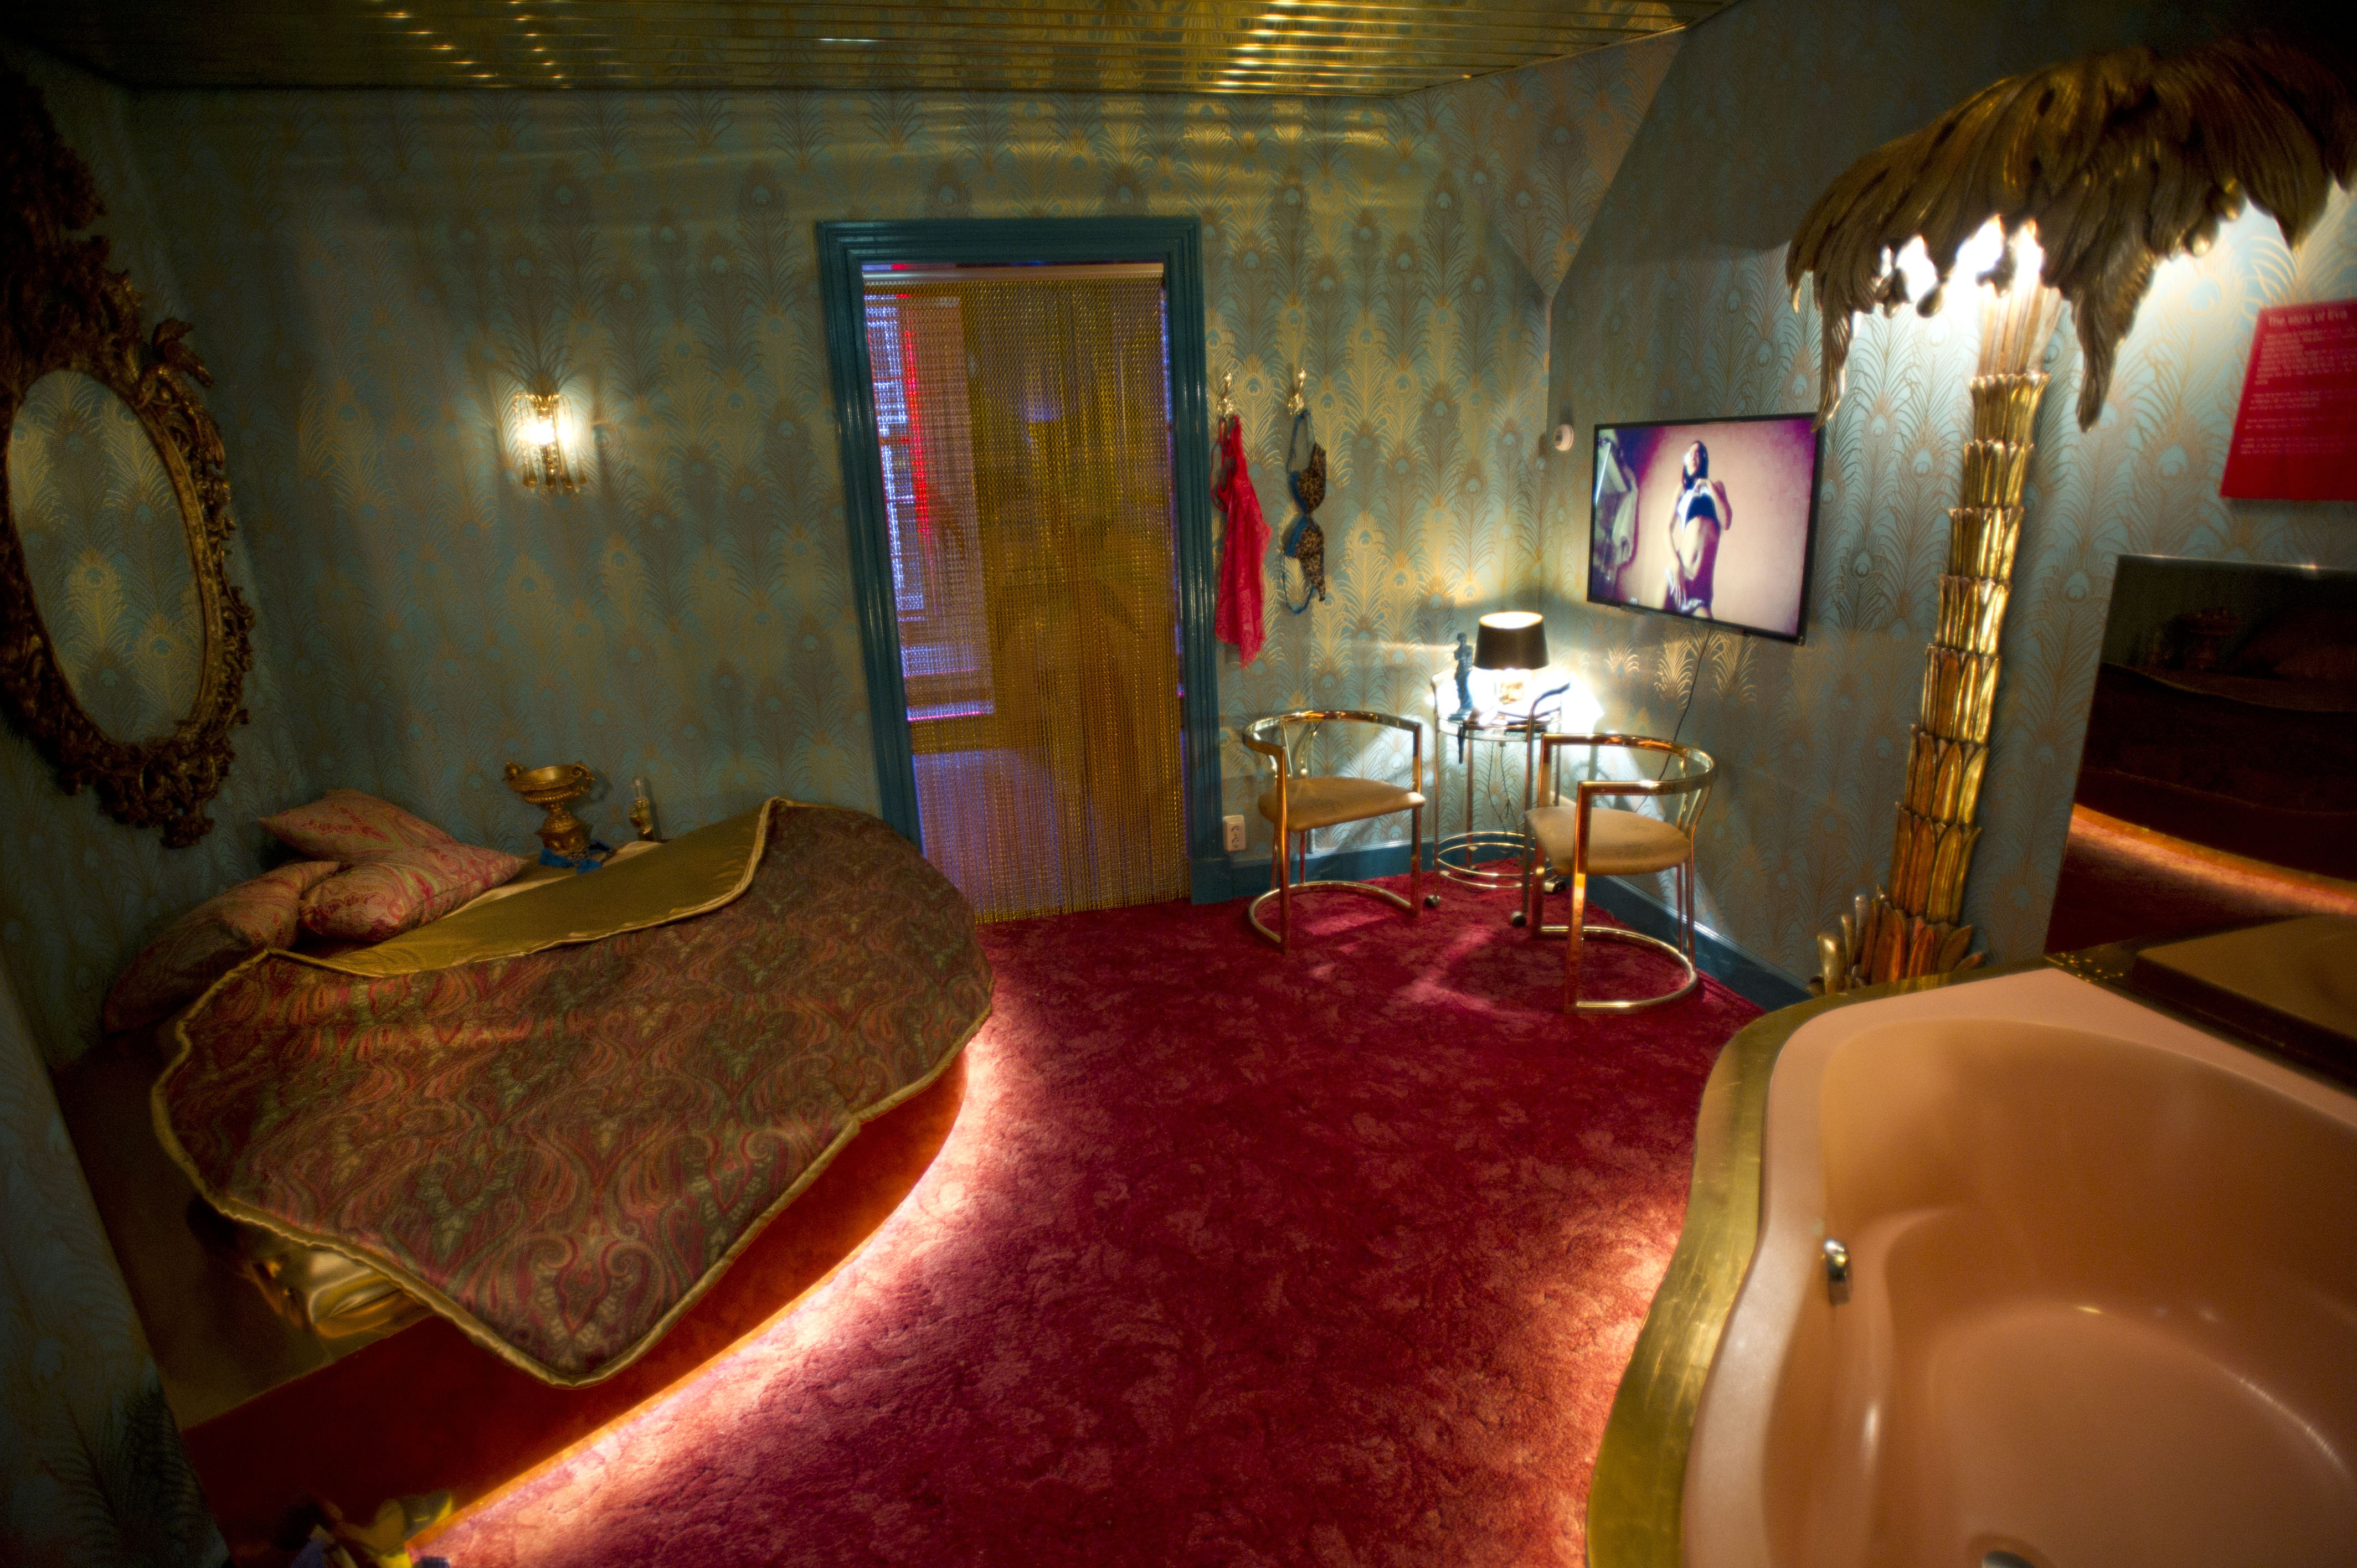 Amsterdam - Amsterdam's prostitution museum - Pictures - CBS News4256 x 2832